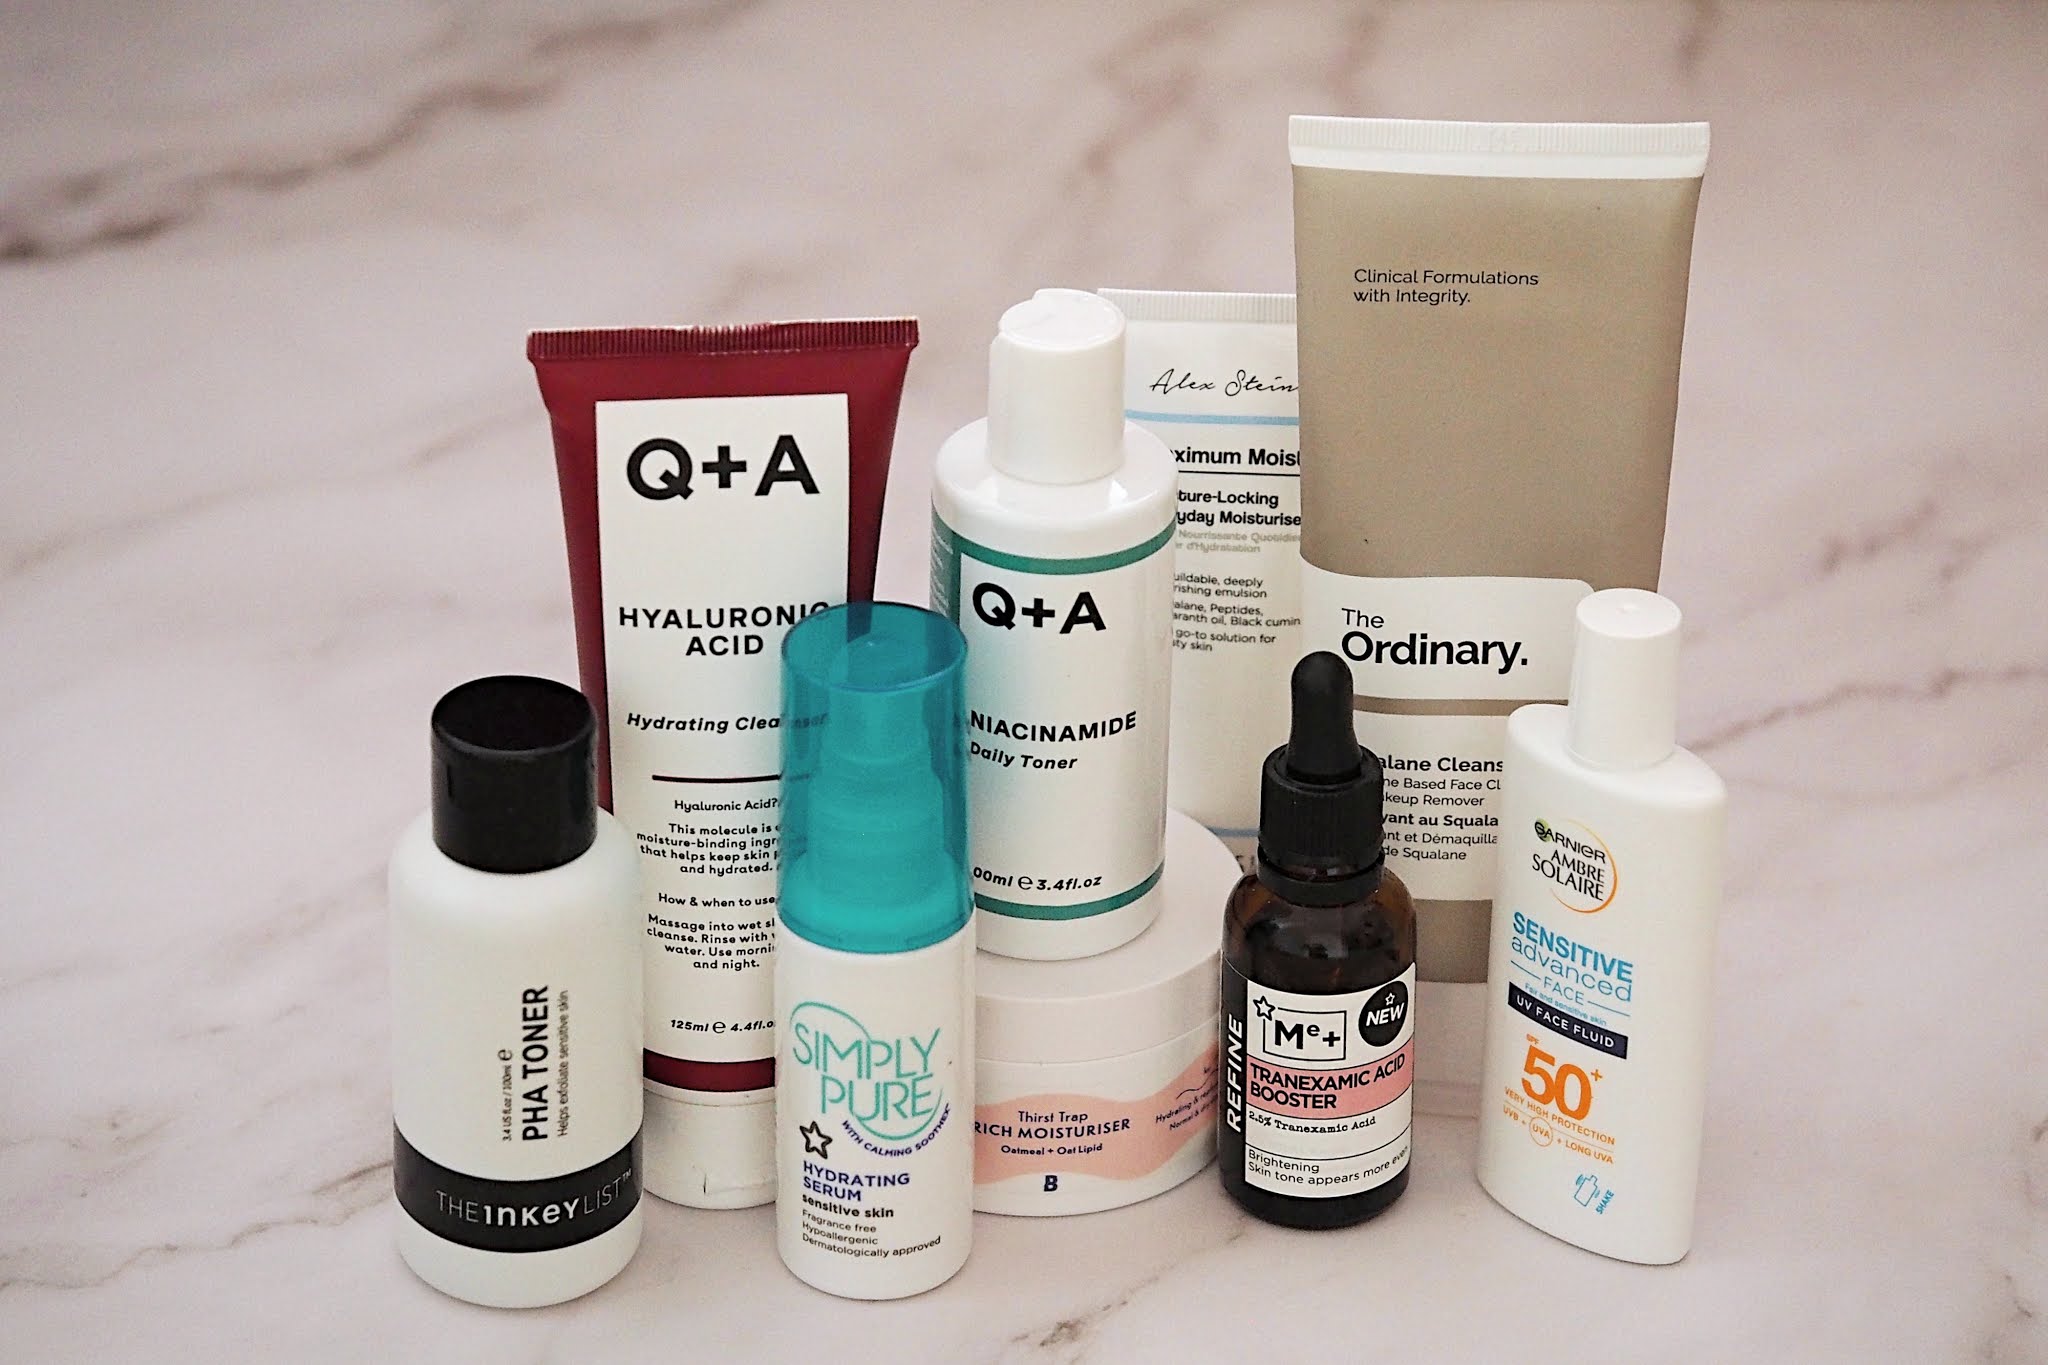 A SKINCARE ROUTINE THAT WORKS, WITH EVERY PRODUCT UNDER £10